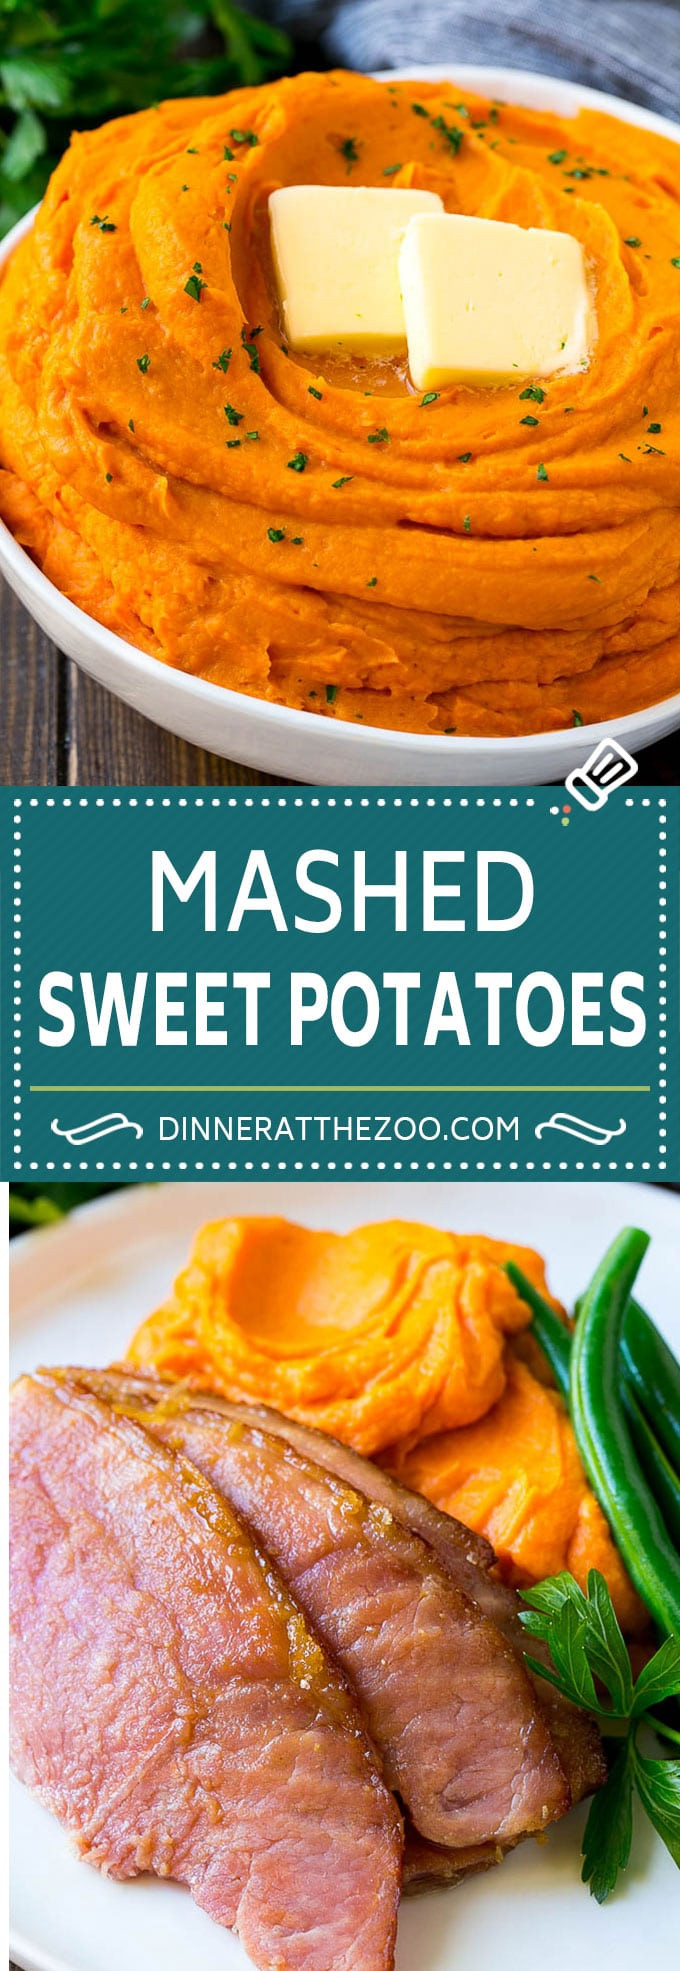 Mashed Sweet Potatoes Thanksgiving
 Mashed Sweet Potatoes Dinner at the Zoo